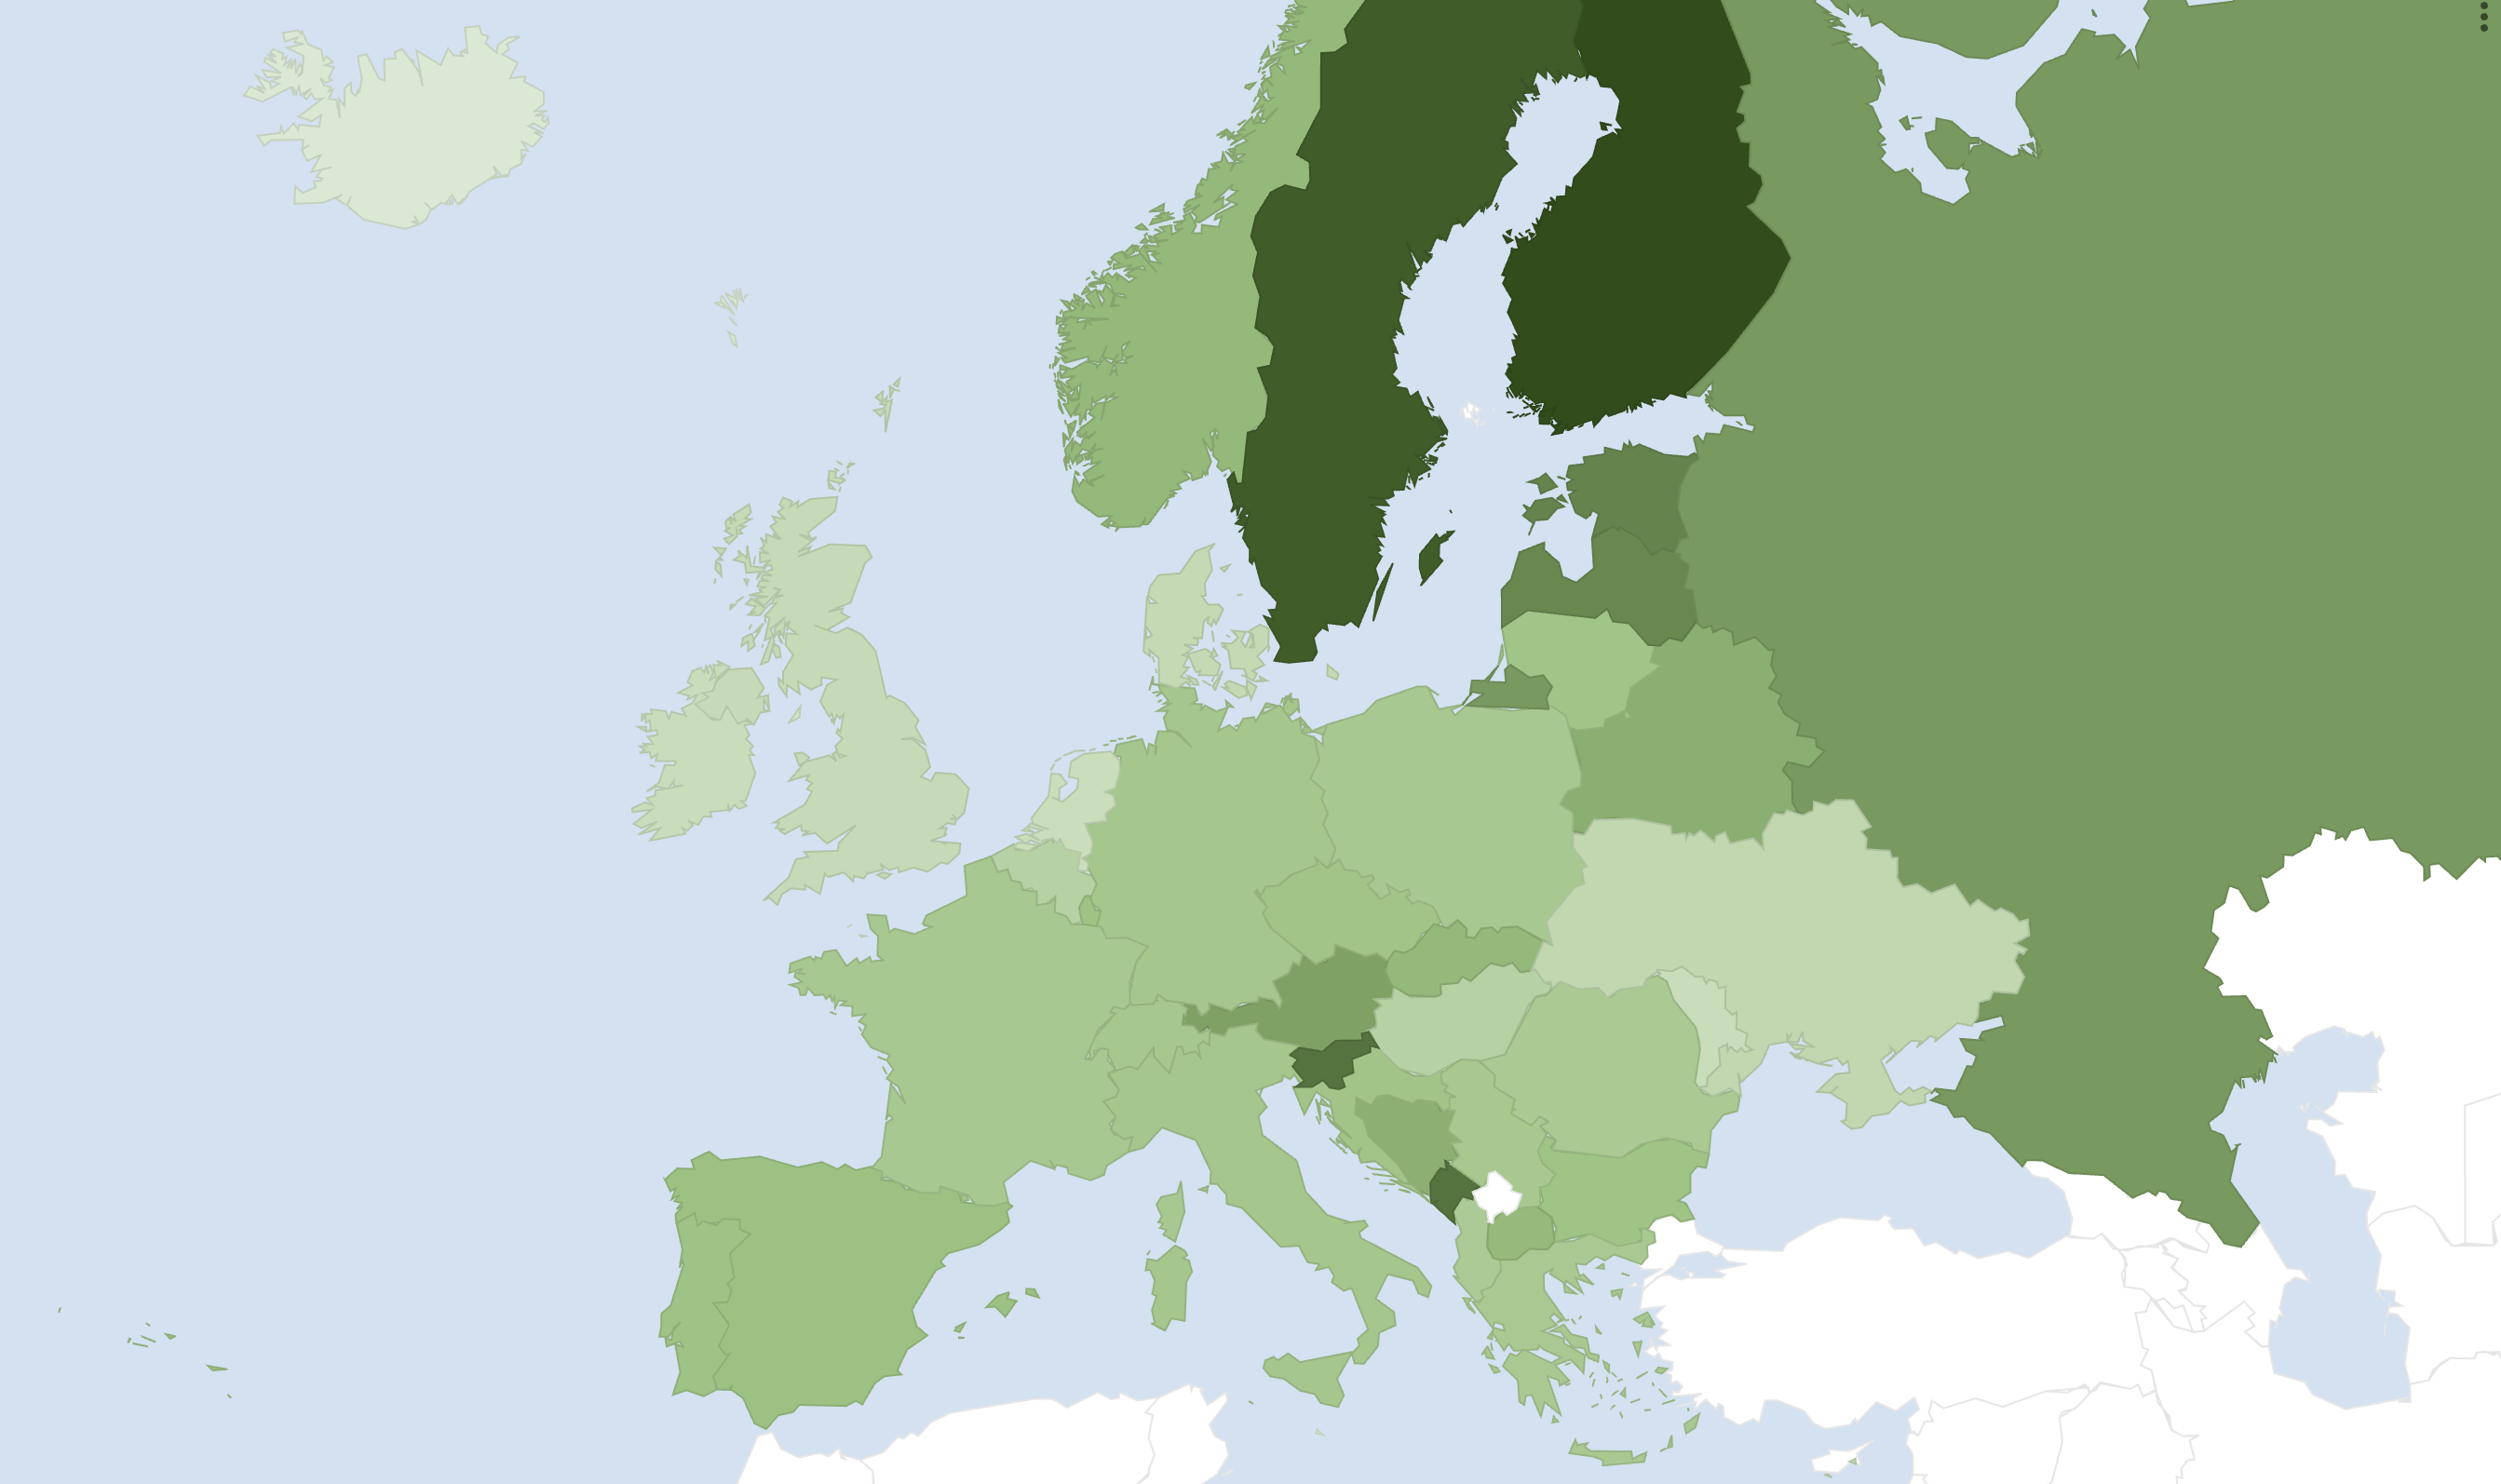 Forest cover in Europe in 2020